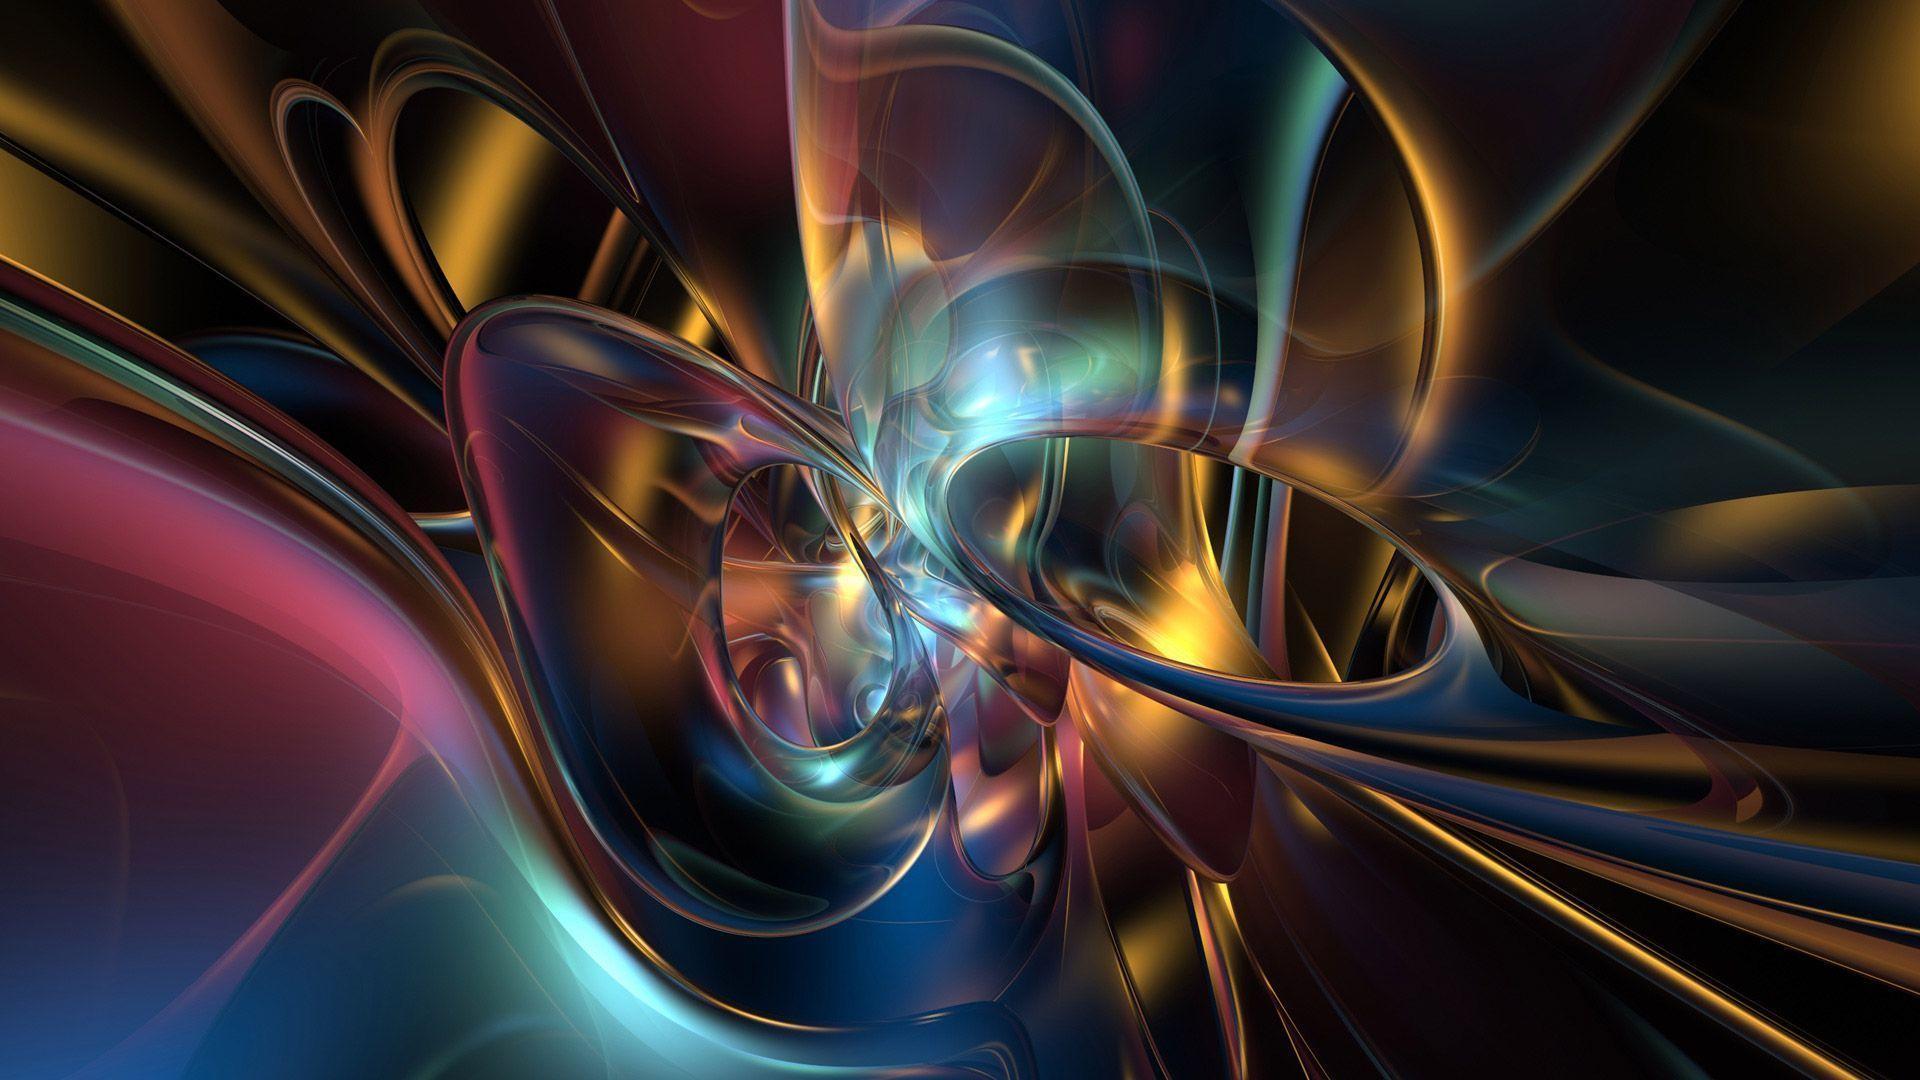 Desktop abstract HD background 1080p dowload